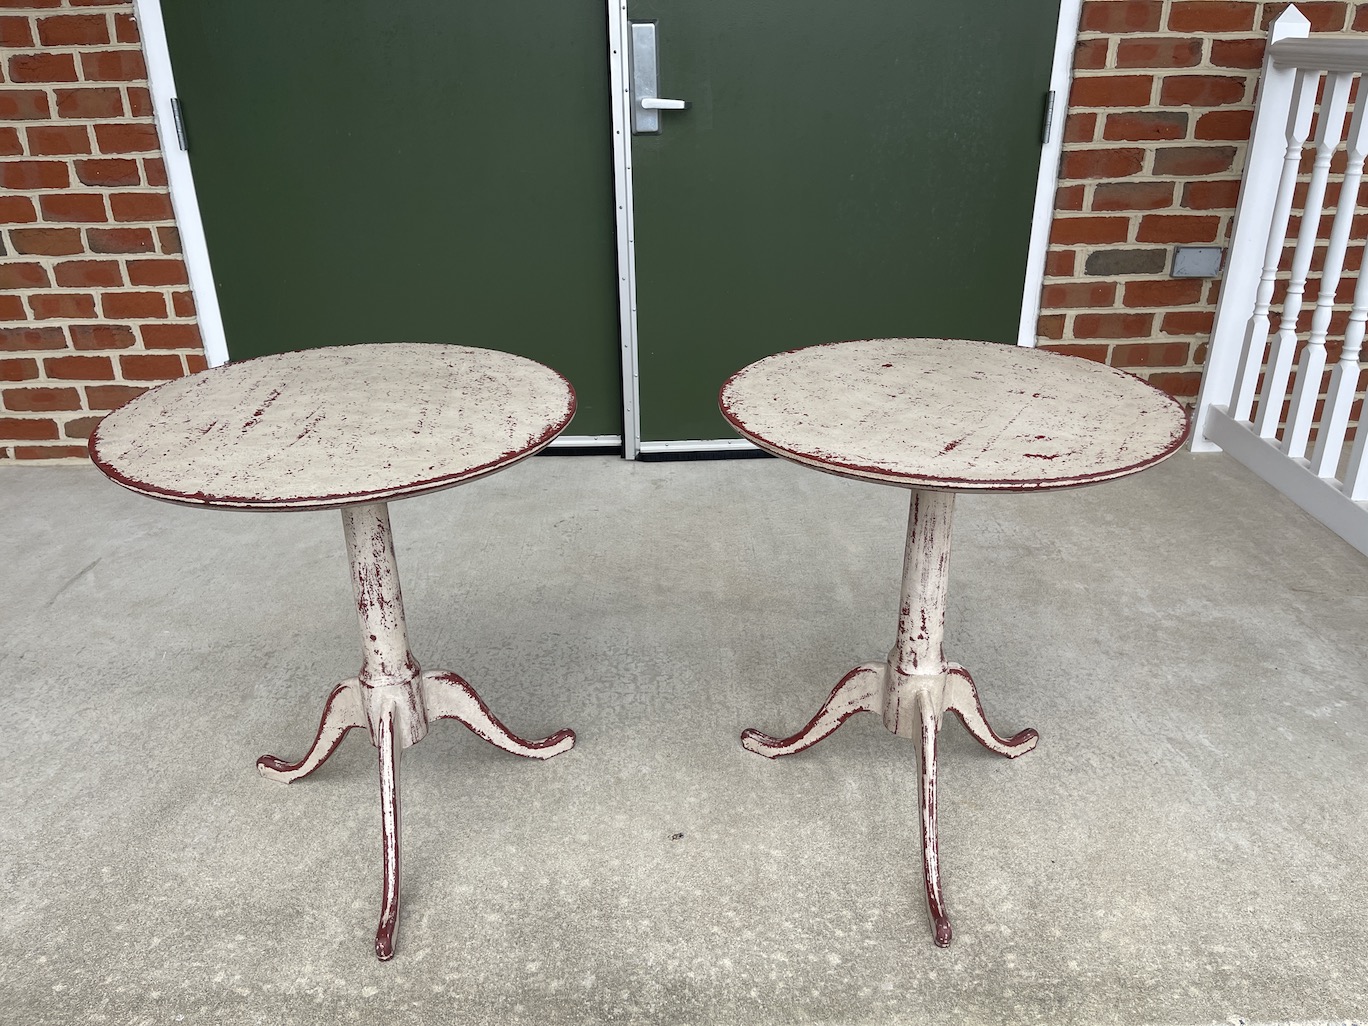 Pair of Queen Anne Round Top Tables Rustic White over Rustic Red Image